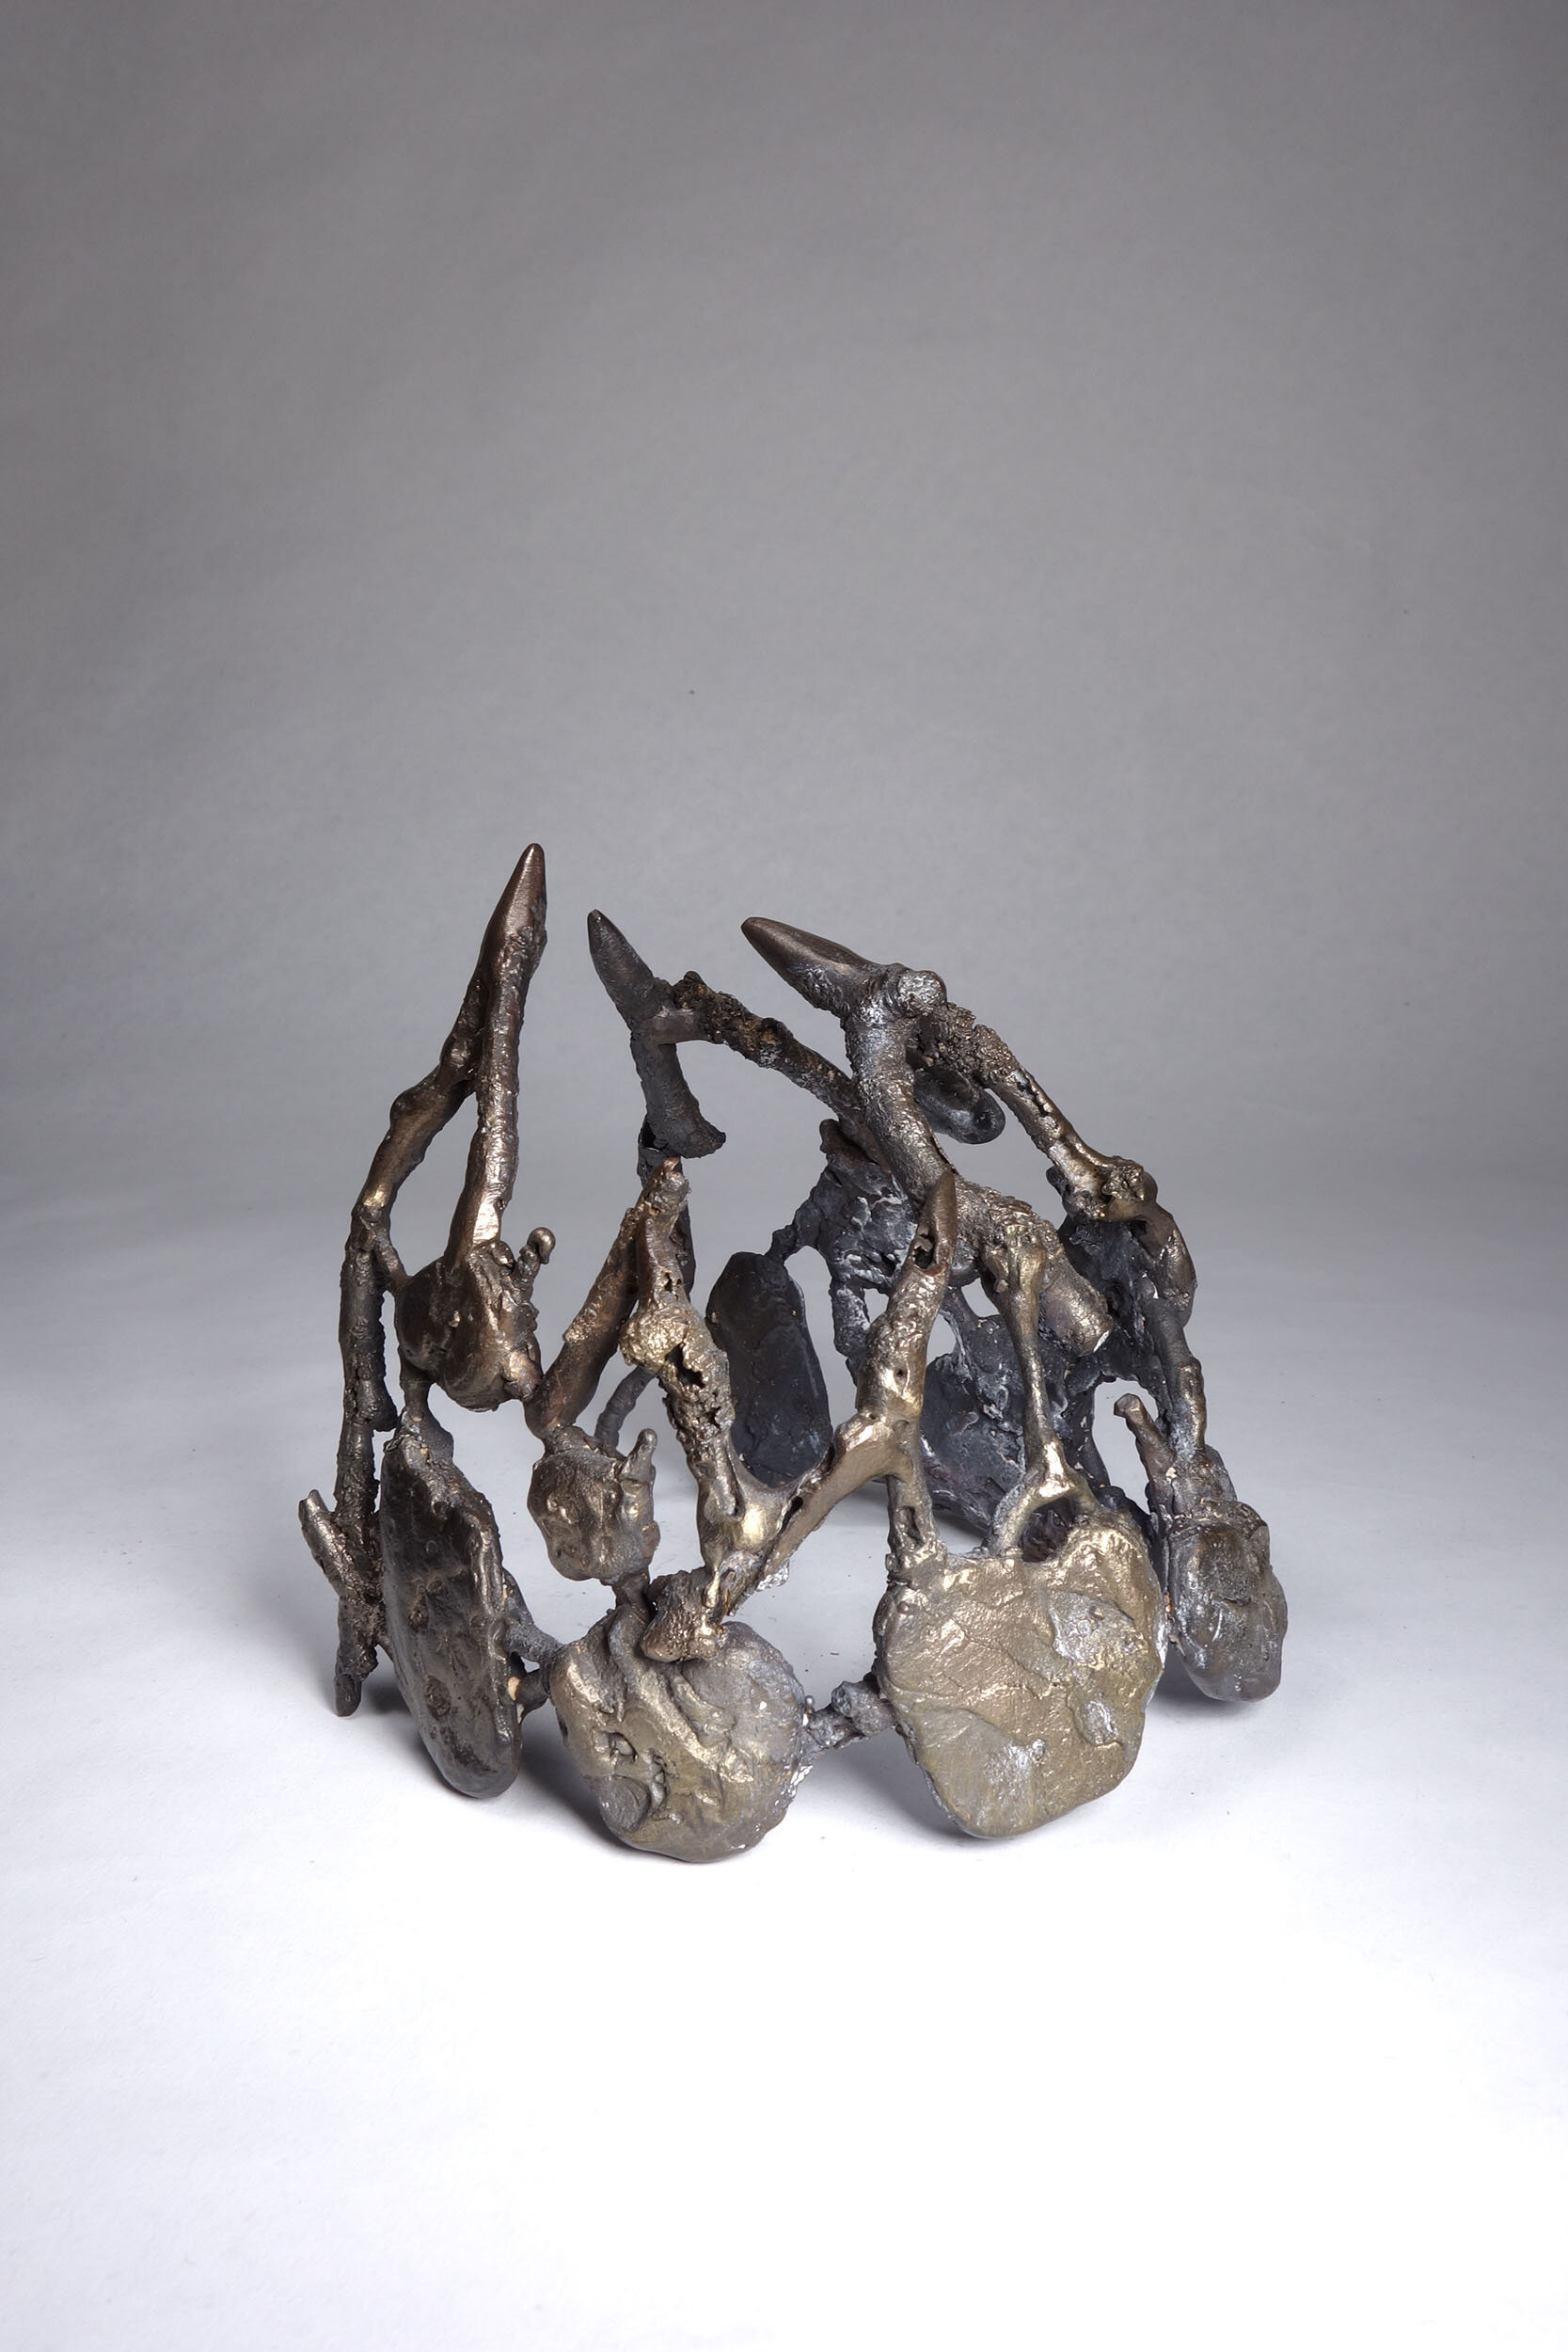   Untitled , Independent Study Foundry: 2016, bronze 